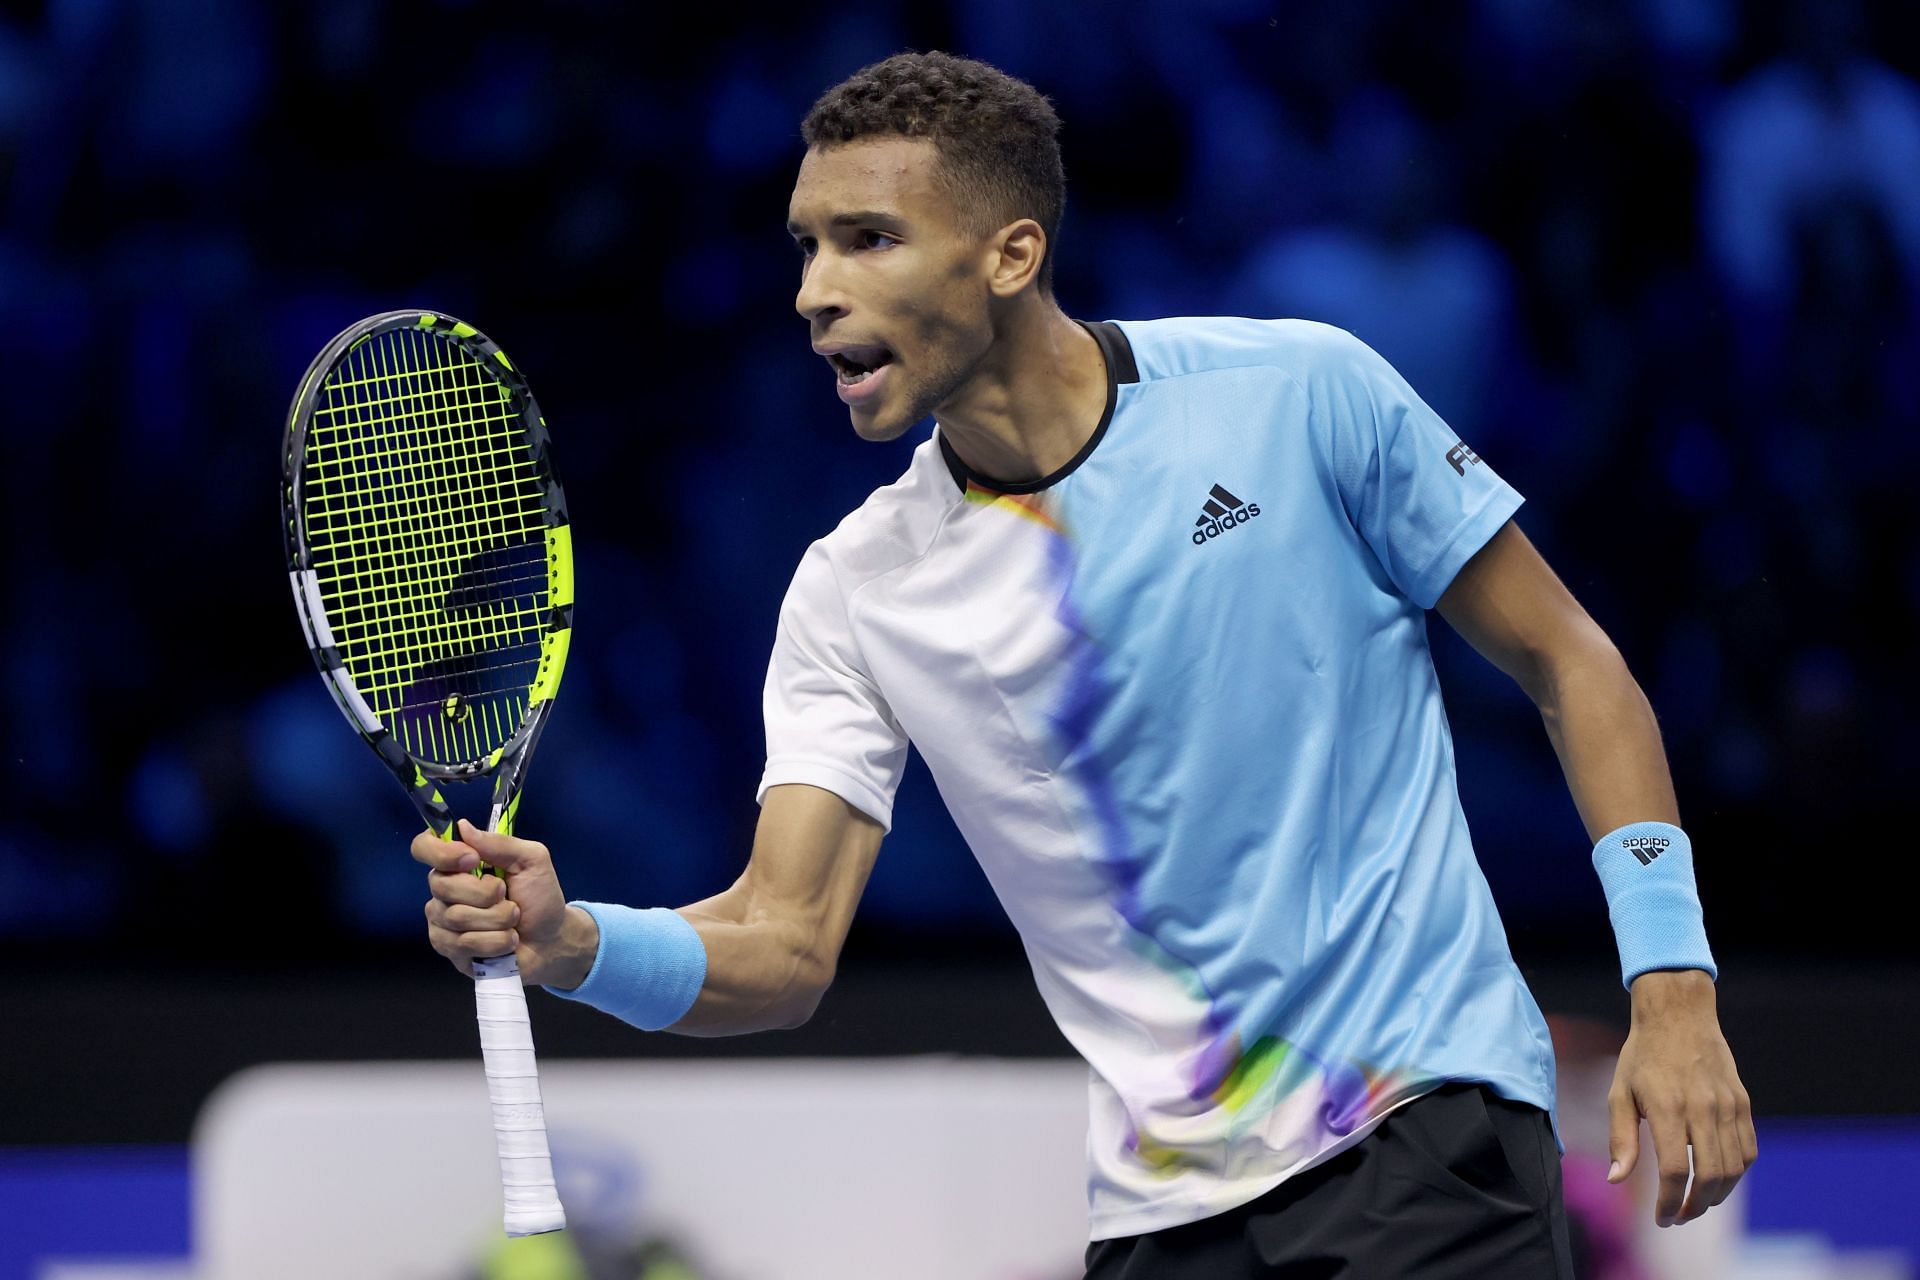 Felix Auger-Aliassime in action at the Nitto ATP Finals.